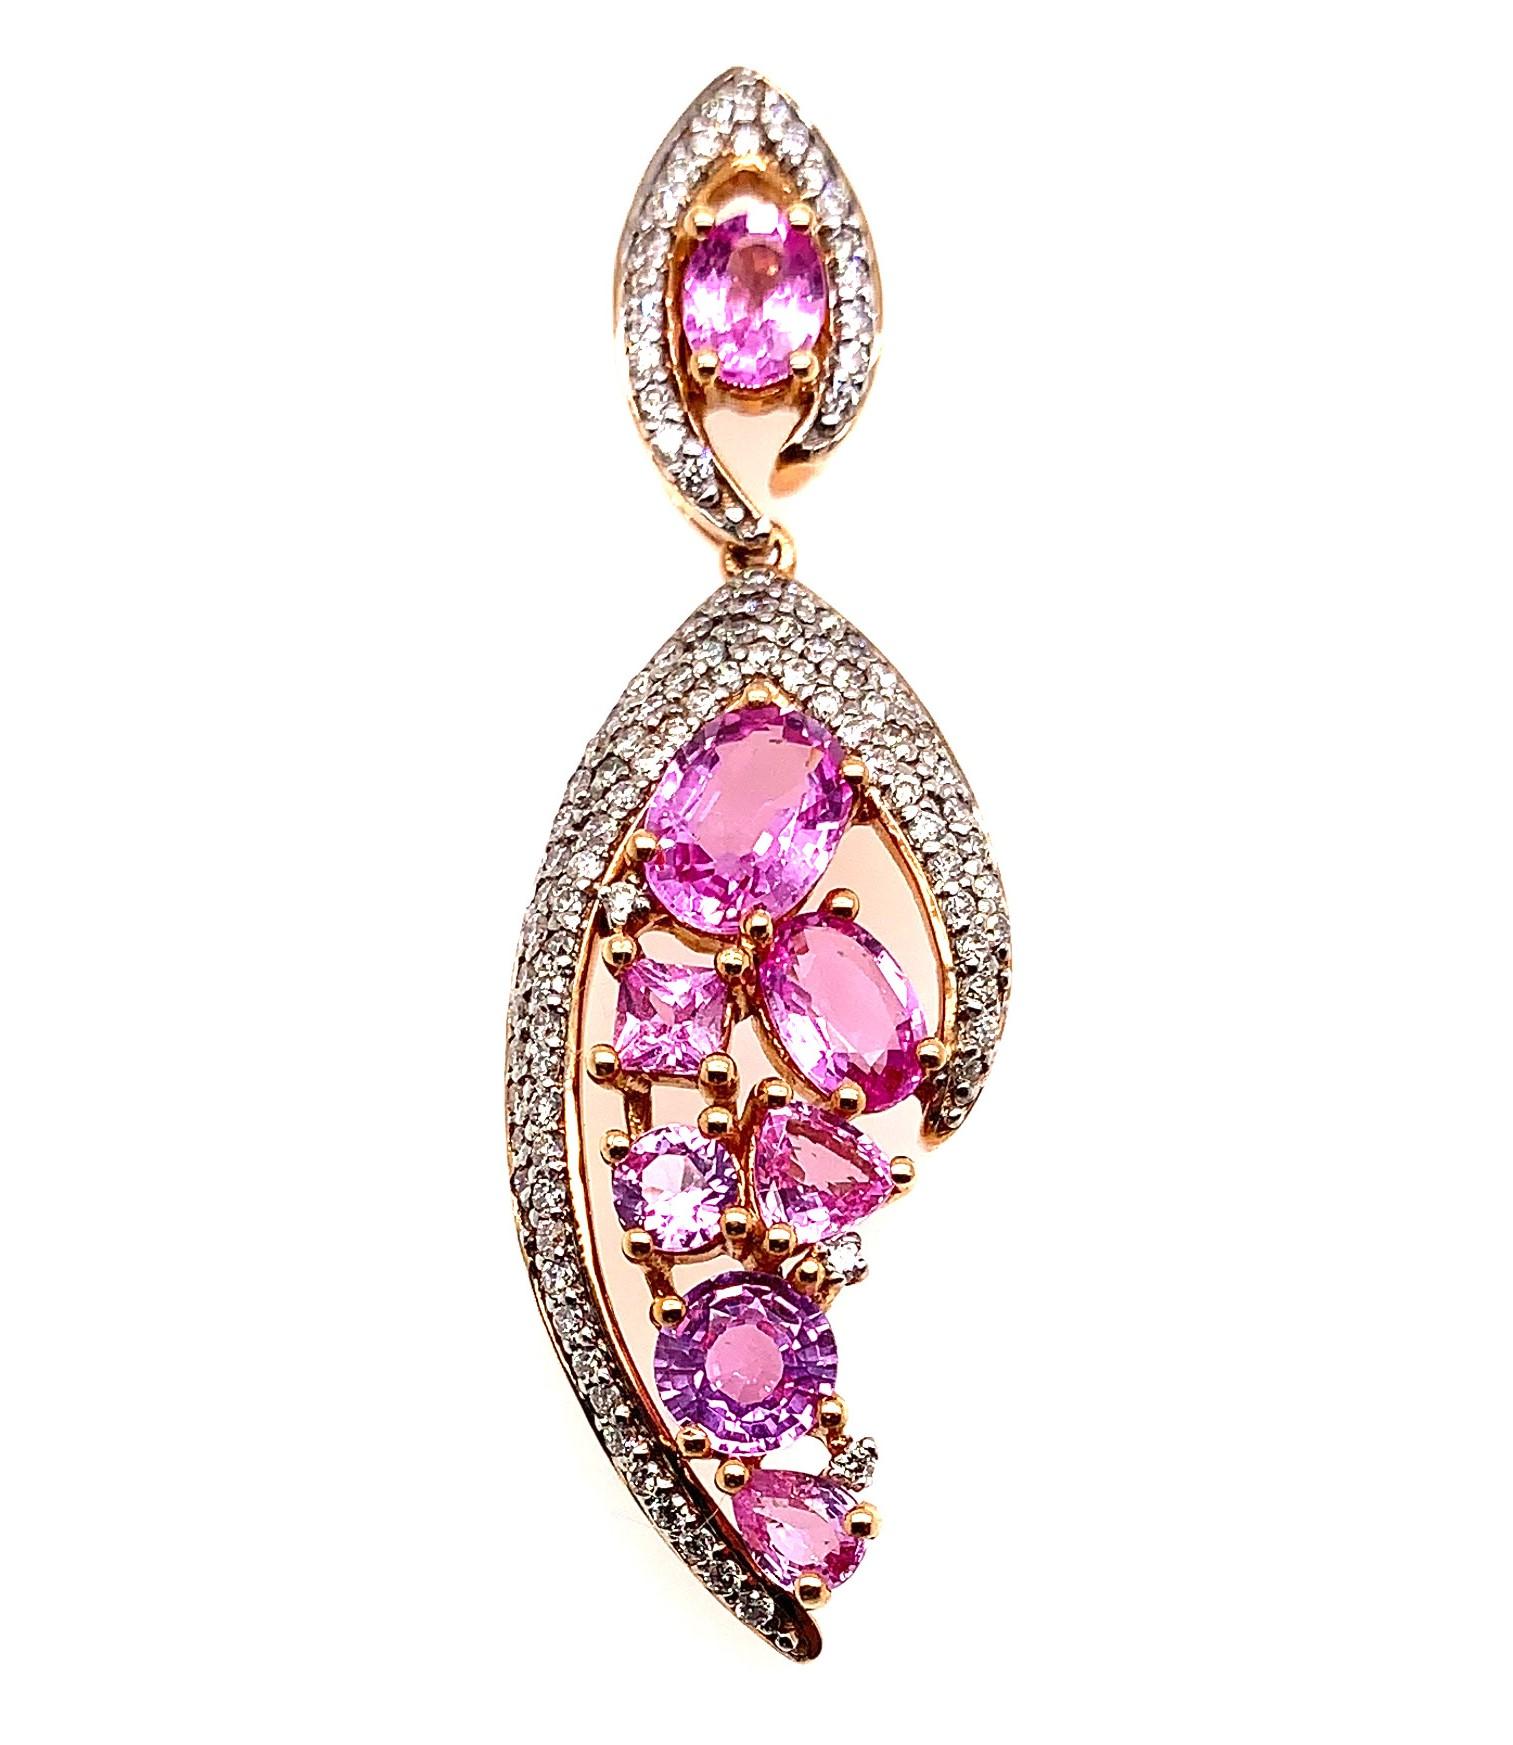 Contemporary 6.99 Carat Pink Sapphire Earring in 18 Karat Rose Gold with Diamonds